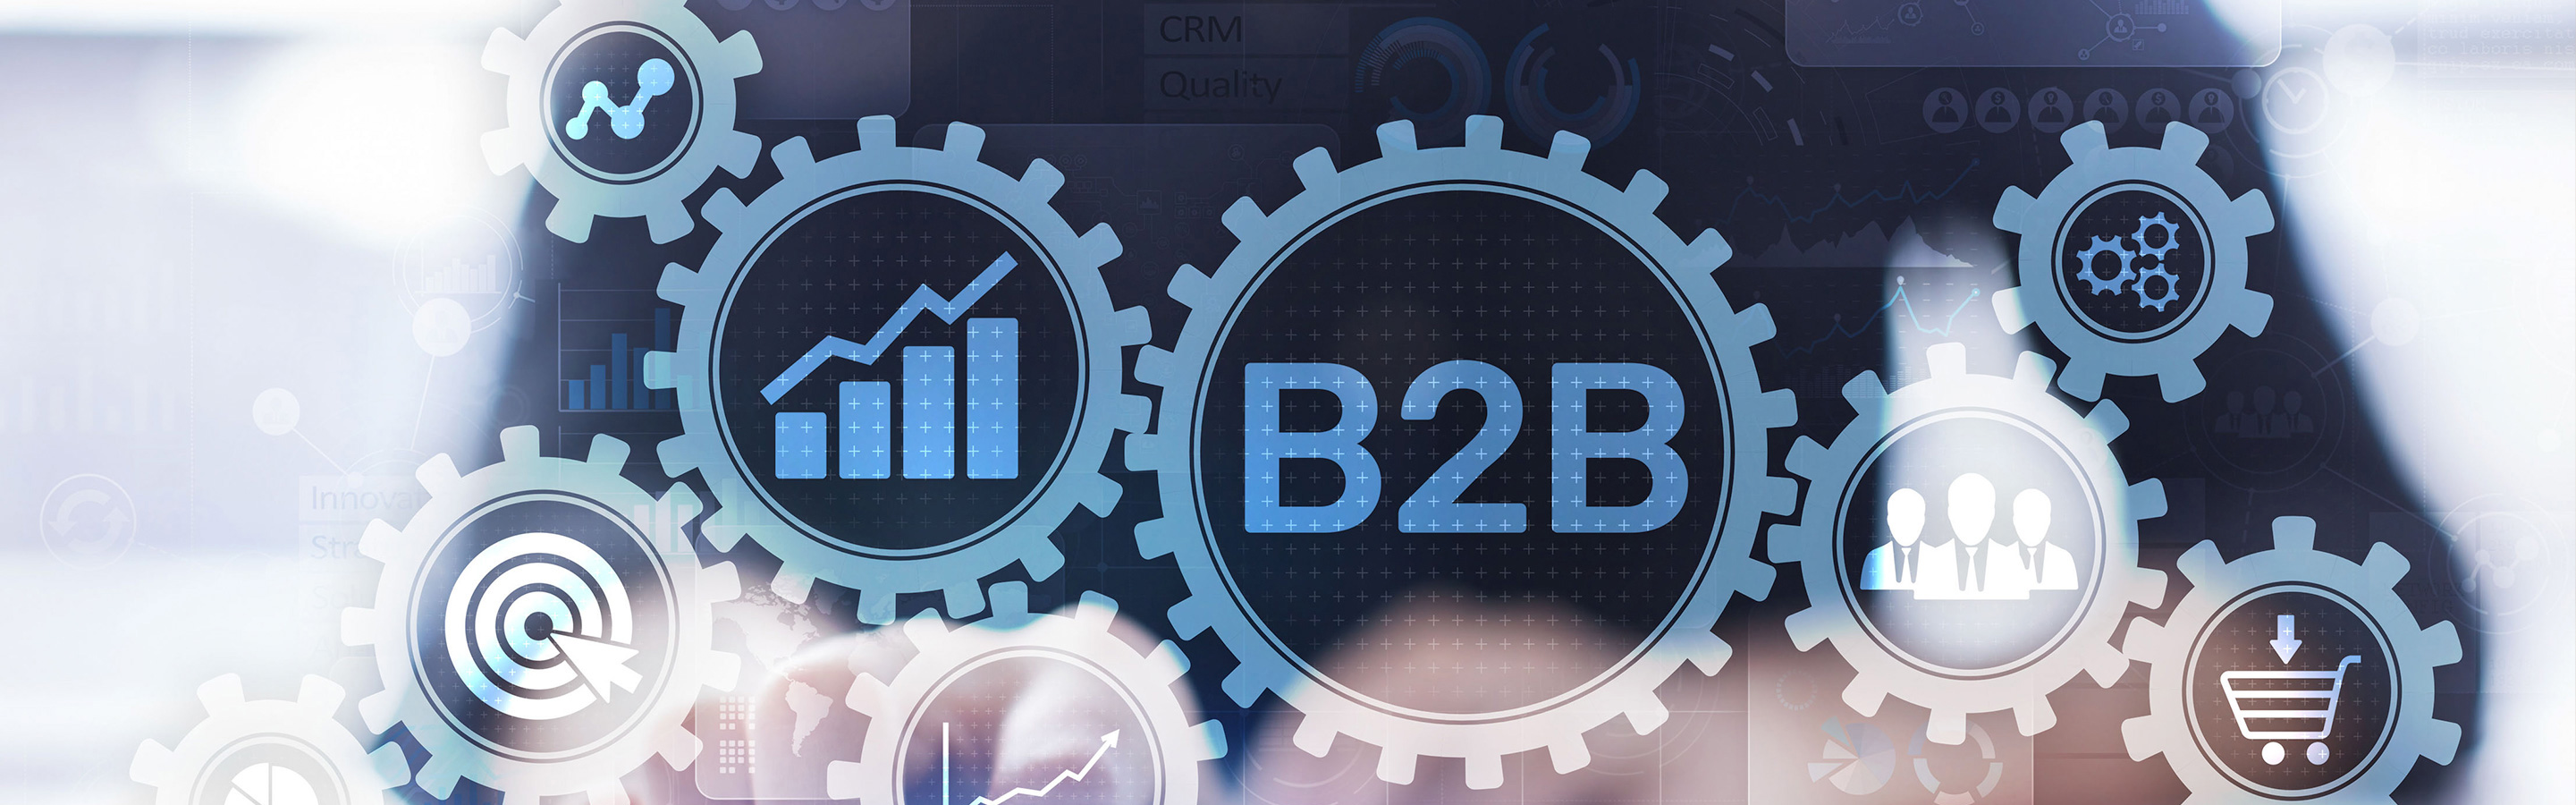 gears showing how different elements of B2B work together